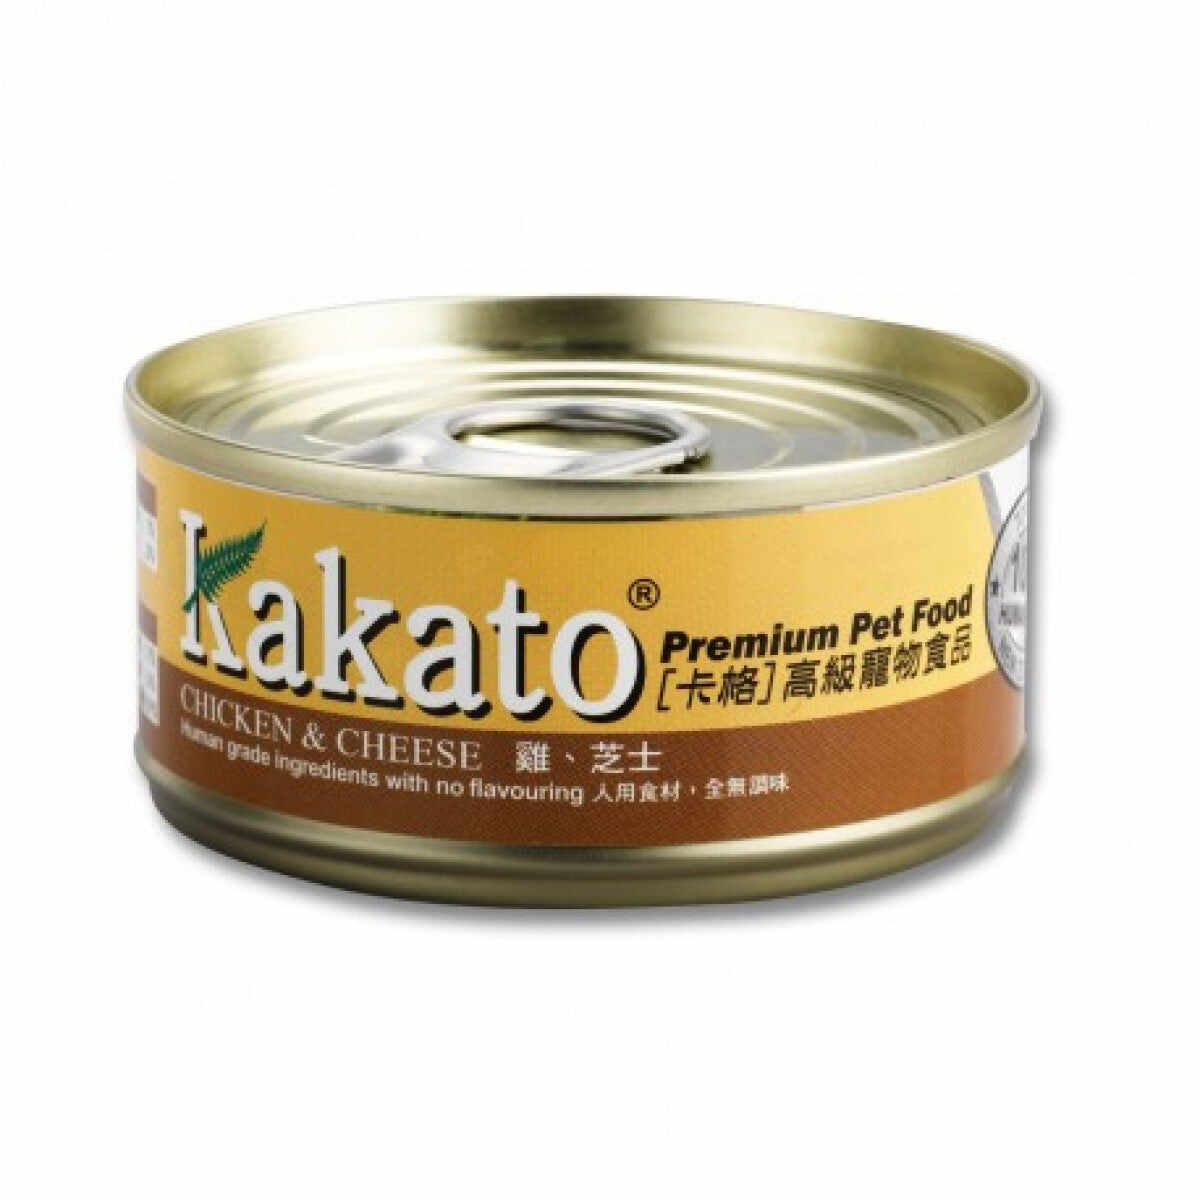 Kakato - Chicken & Cheese (Dogs & Cats) canned